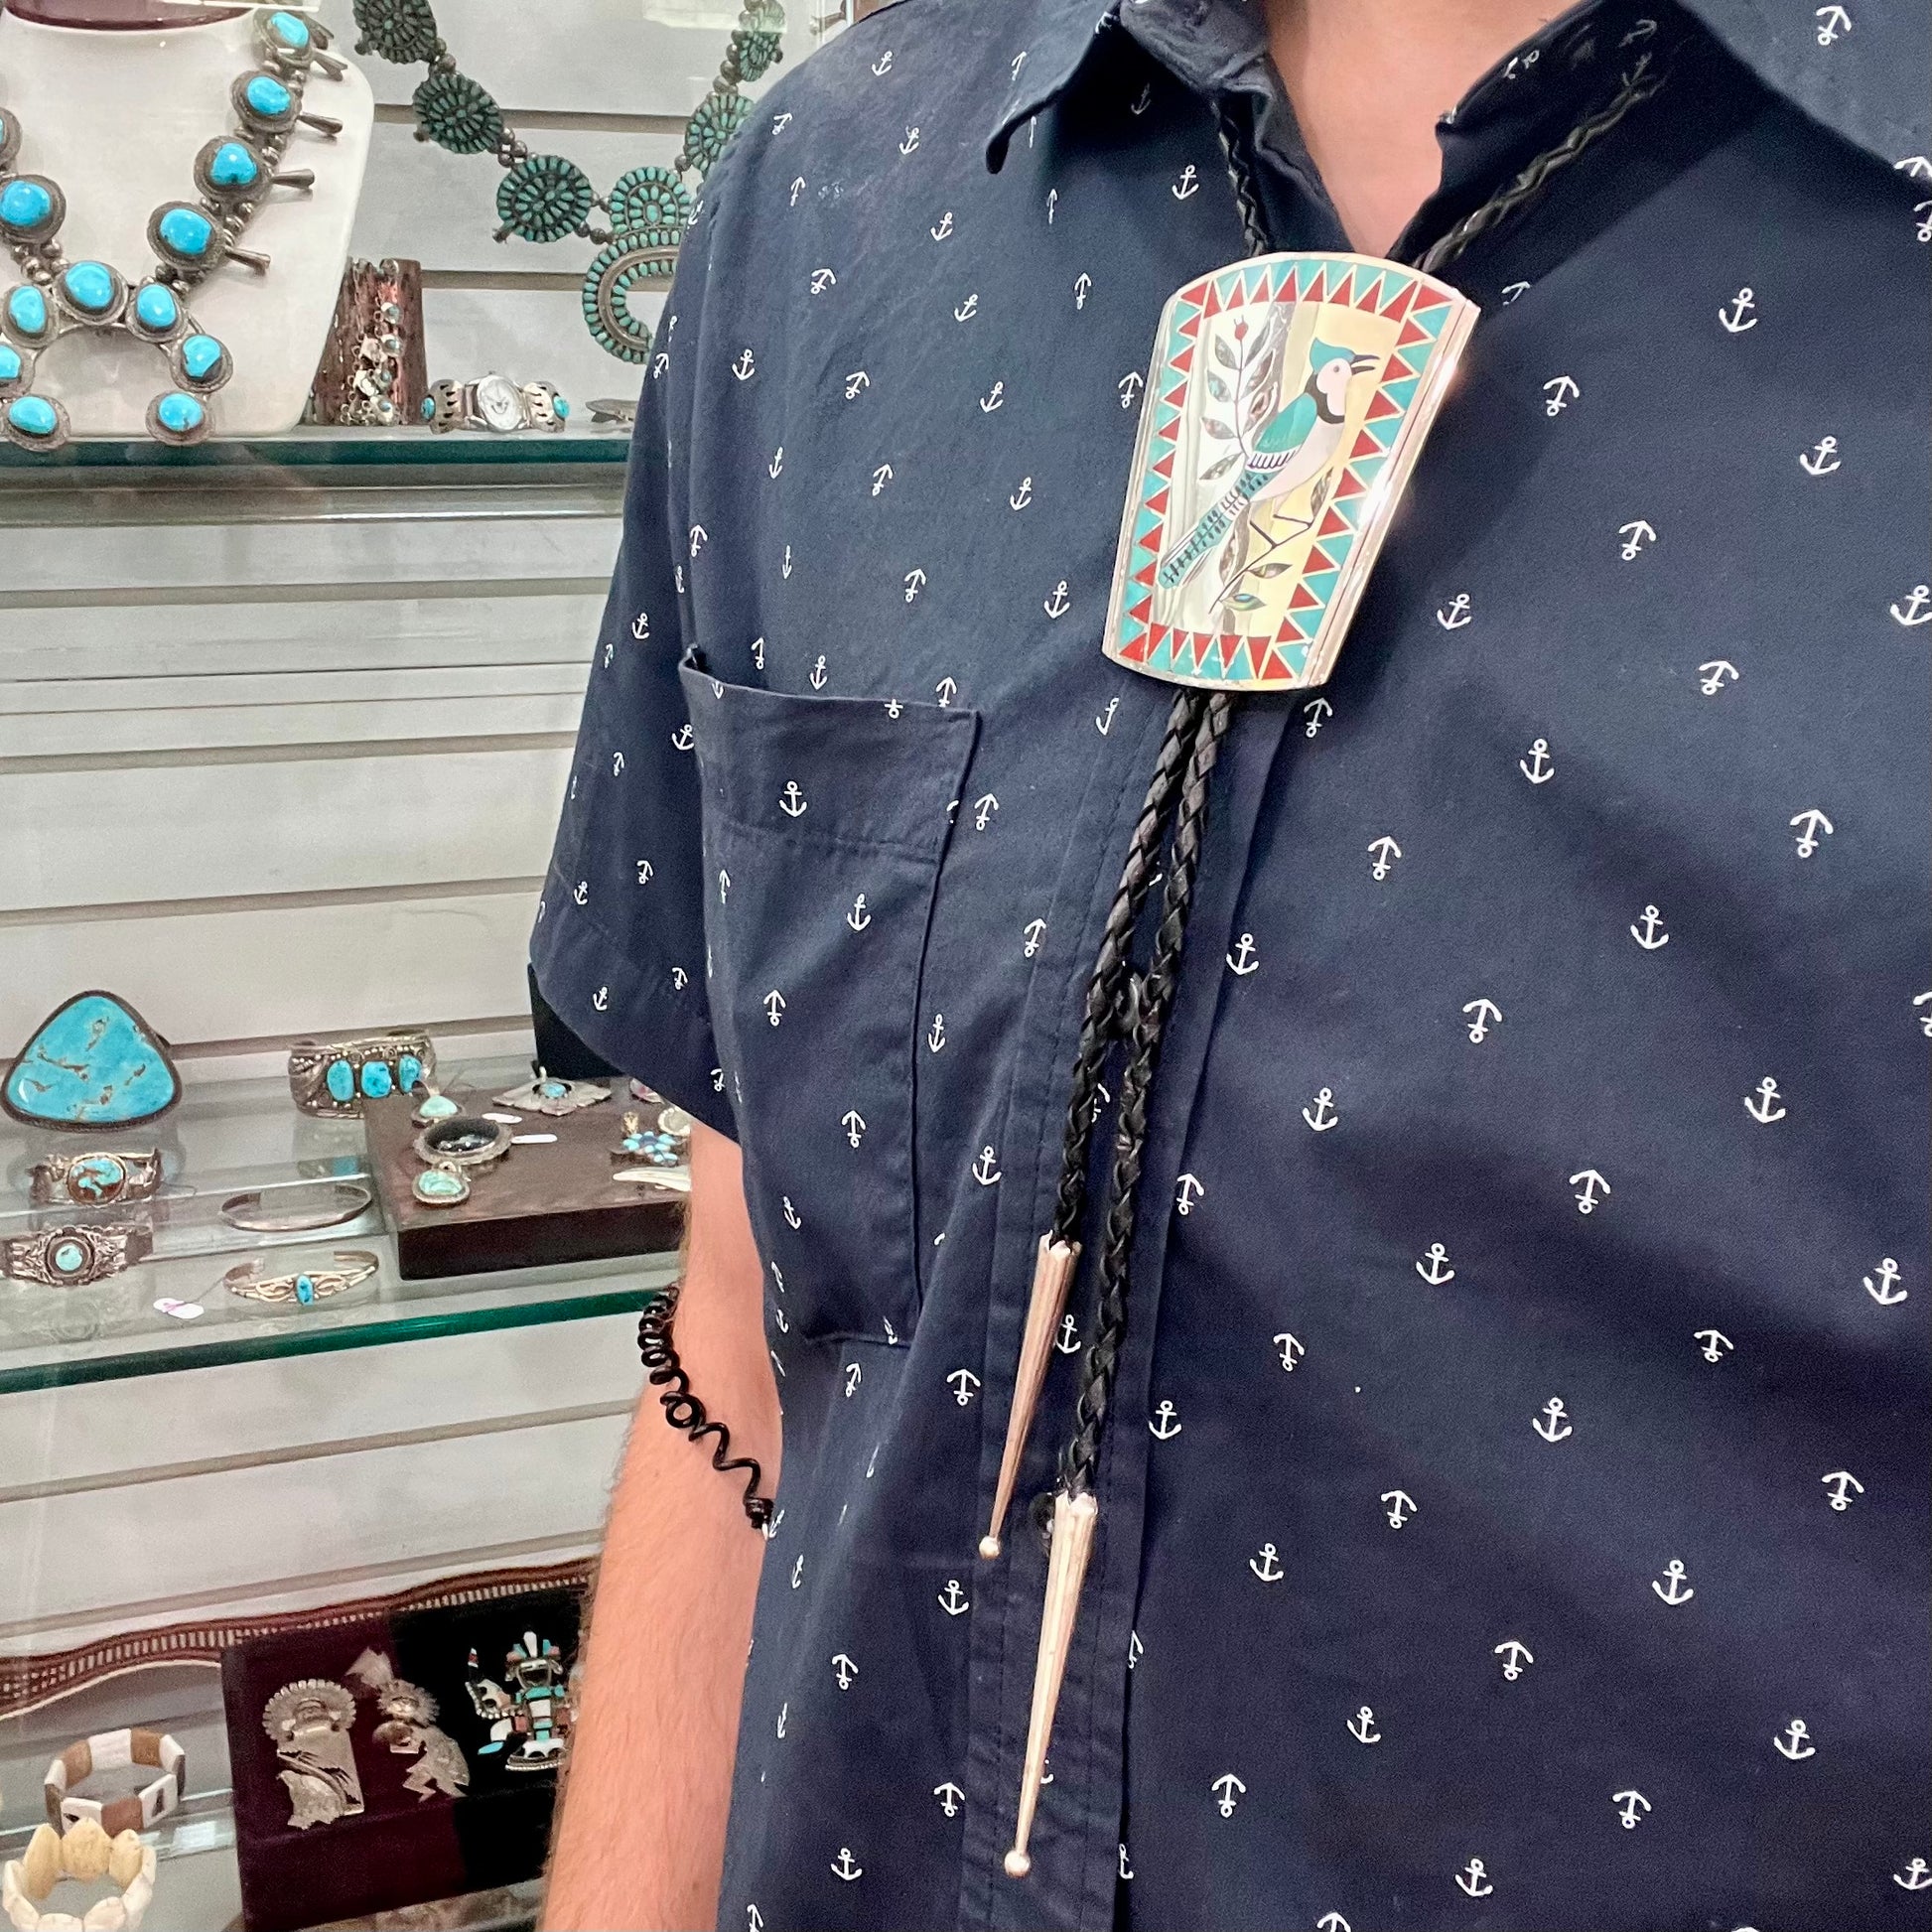 A turquoise and coral inlay bolo tie featuring the motif of a blue jay bird, handmade by Zuni artists Dennis and Nancy Edaakie.